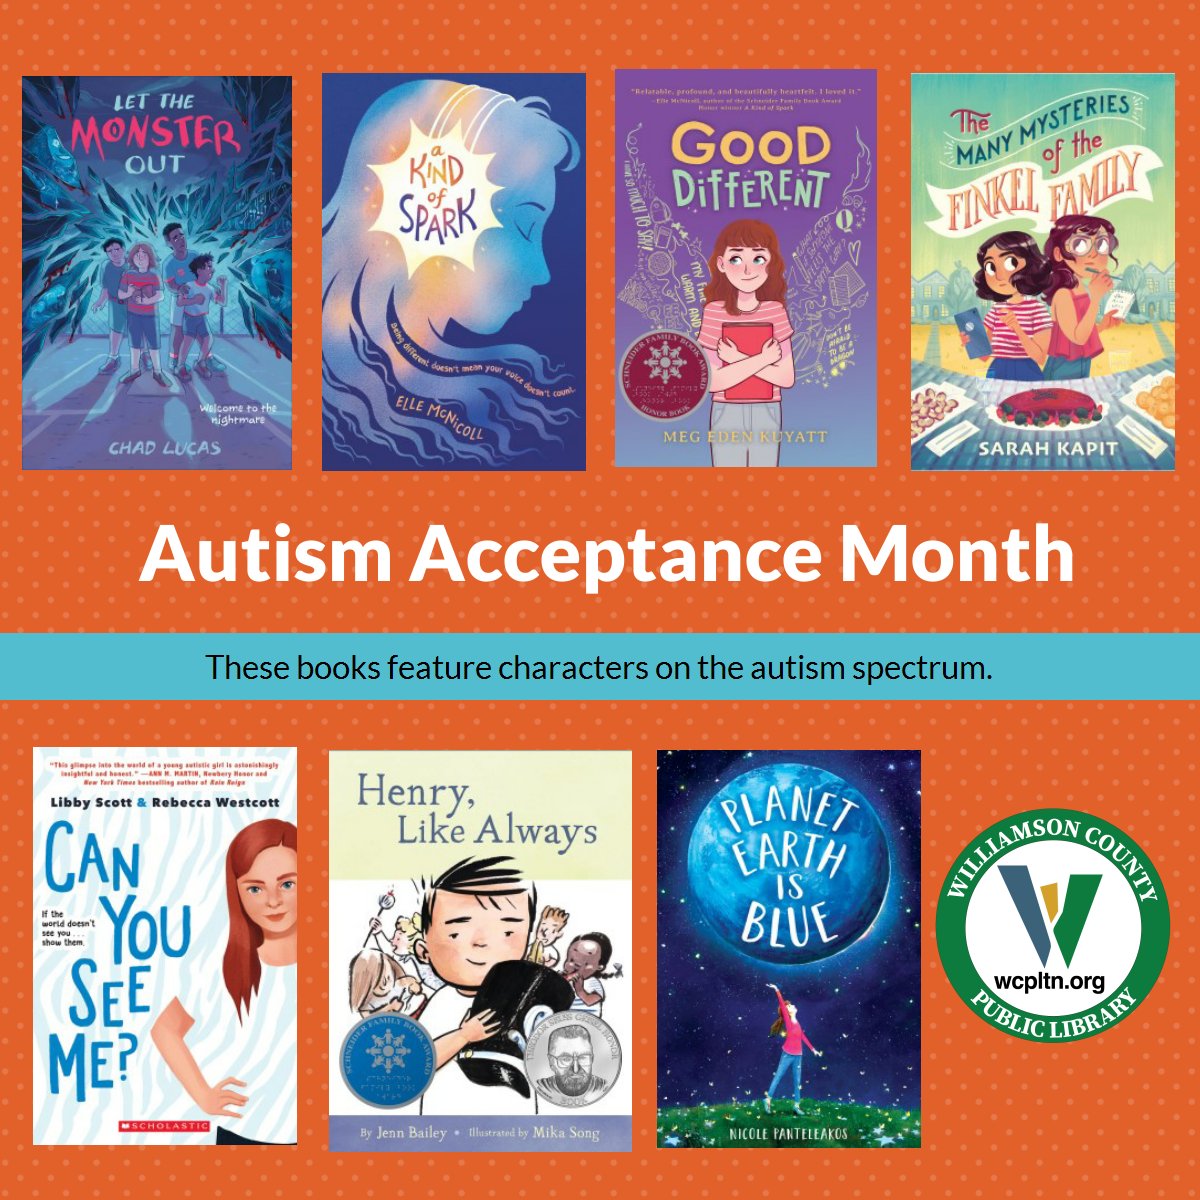 Autism Acceptance Day is internationally recognized on April 2. Check out these titles highlighting neurodiverse characters.